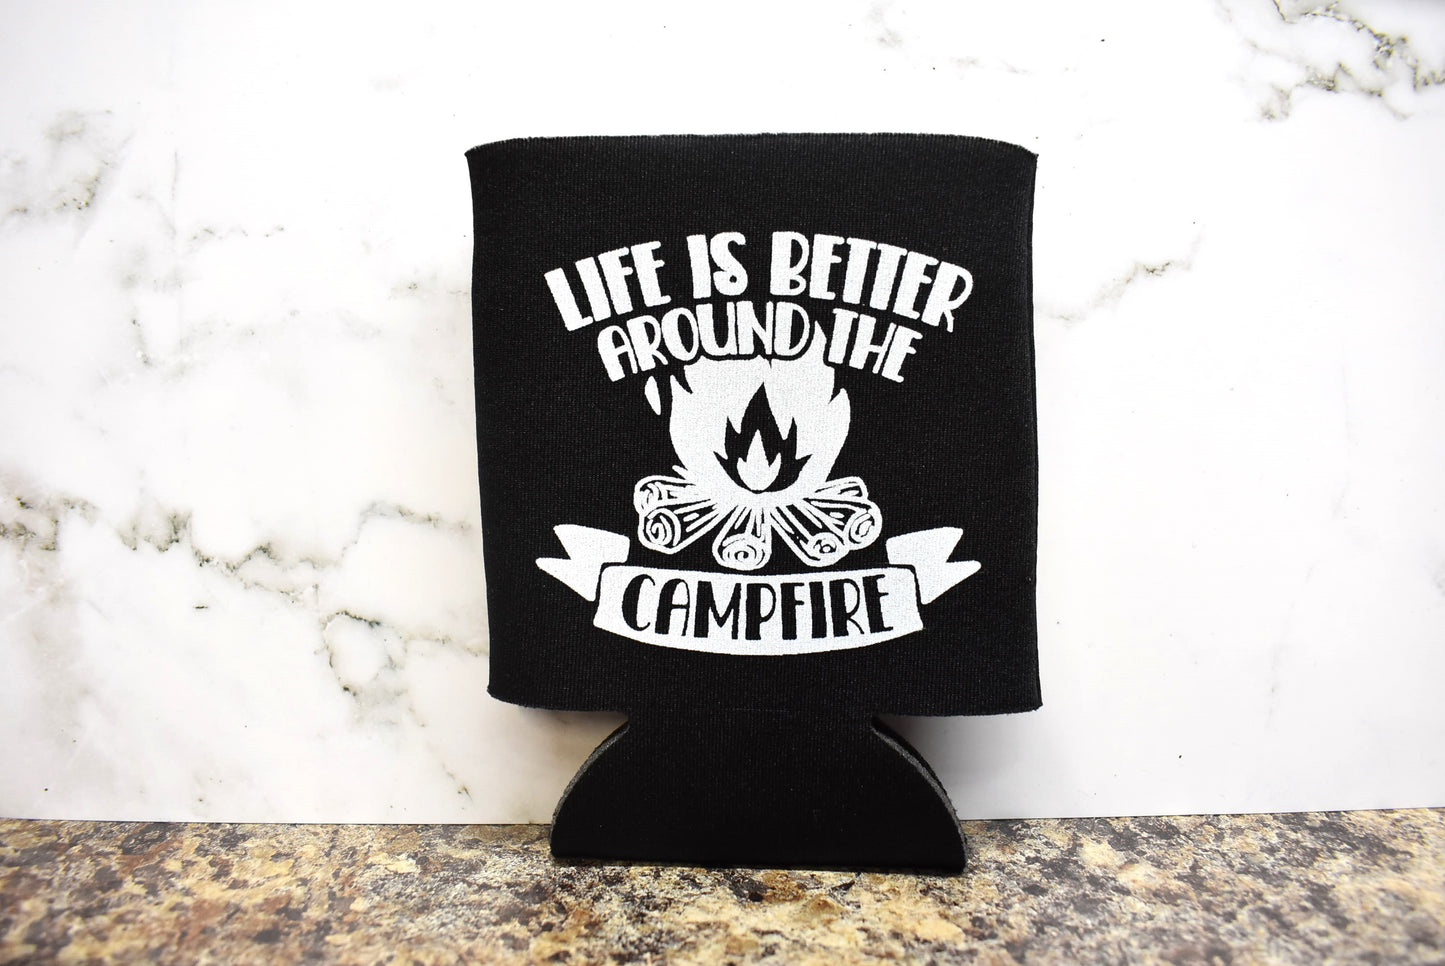 Can Koozie Foam Life Is Better Around The Campfire